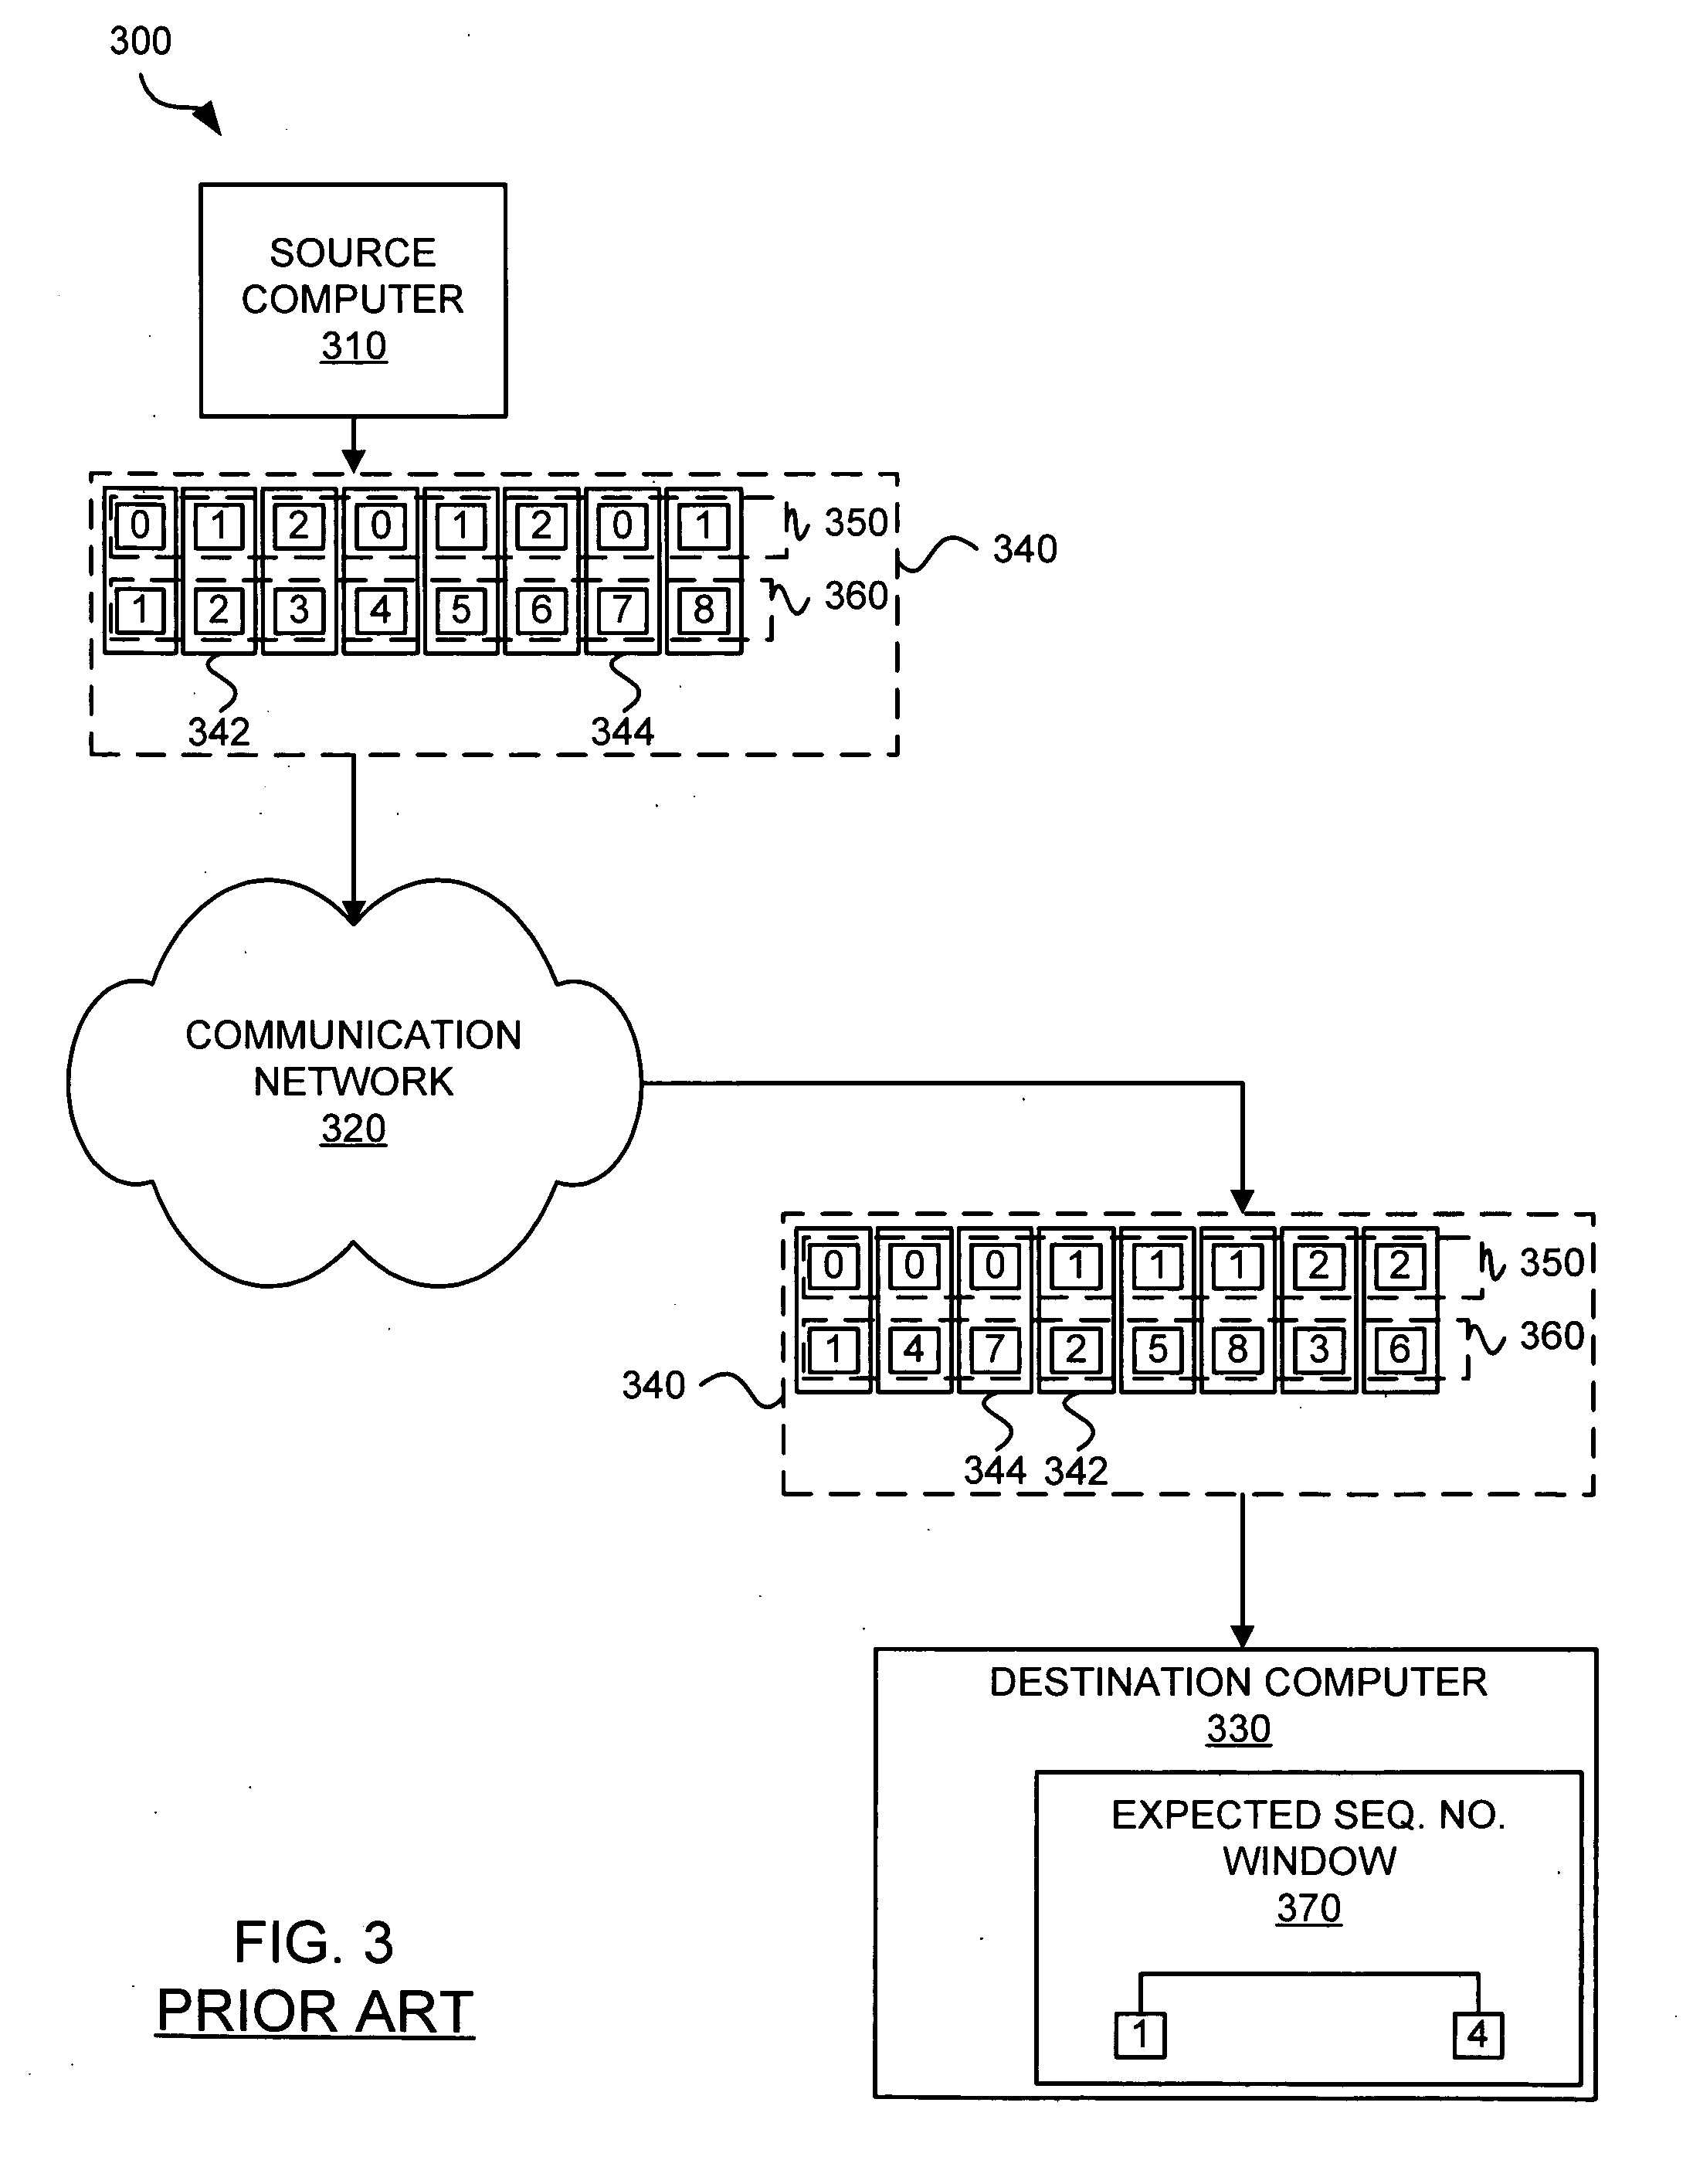 Sequence numbers for multiple quality of service levels